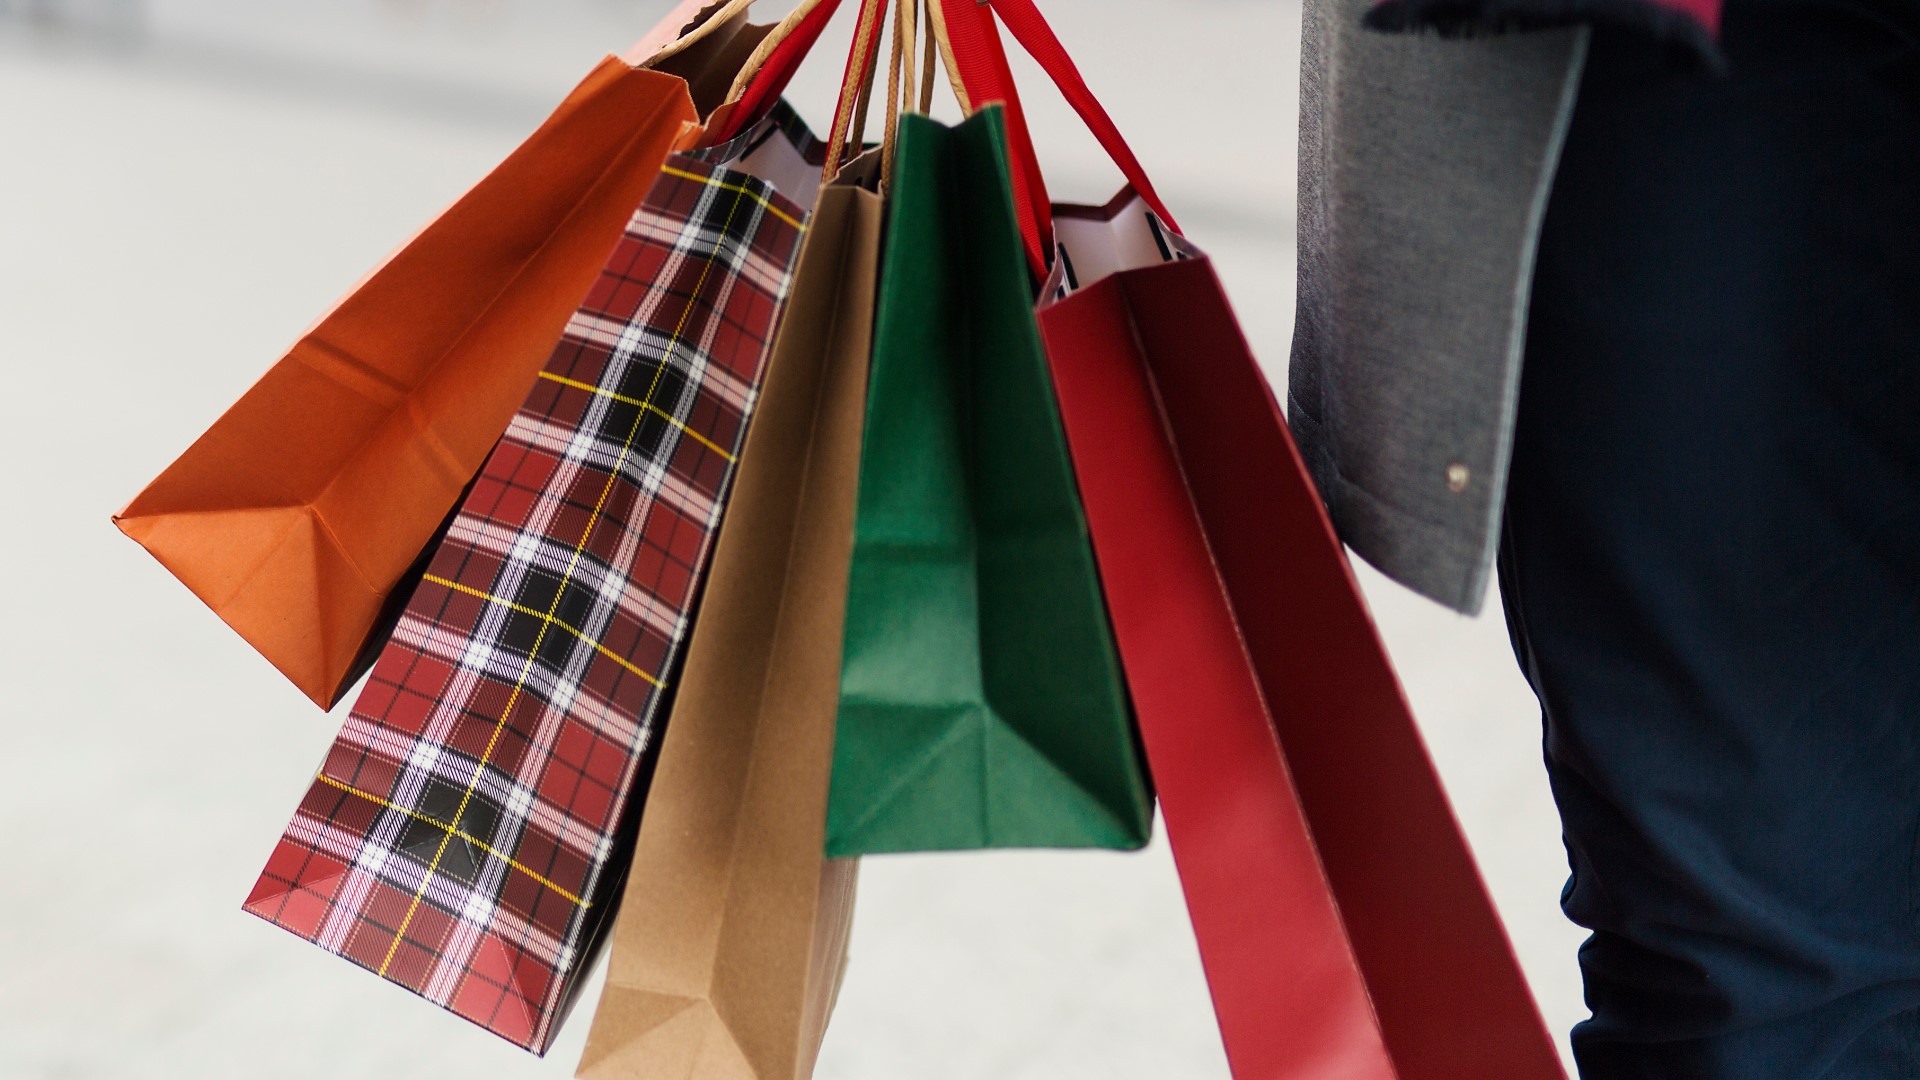 It's possible to do the shopping for the holidays without breaking the bank. Here are some helpful tips for holiday shoppers!